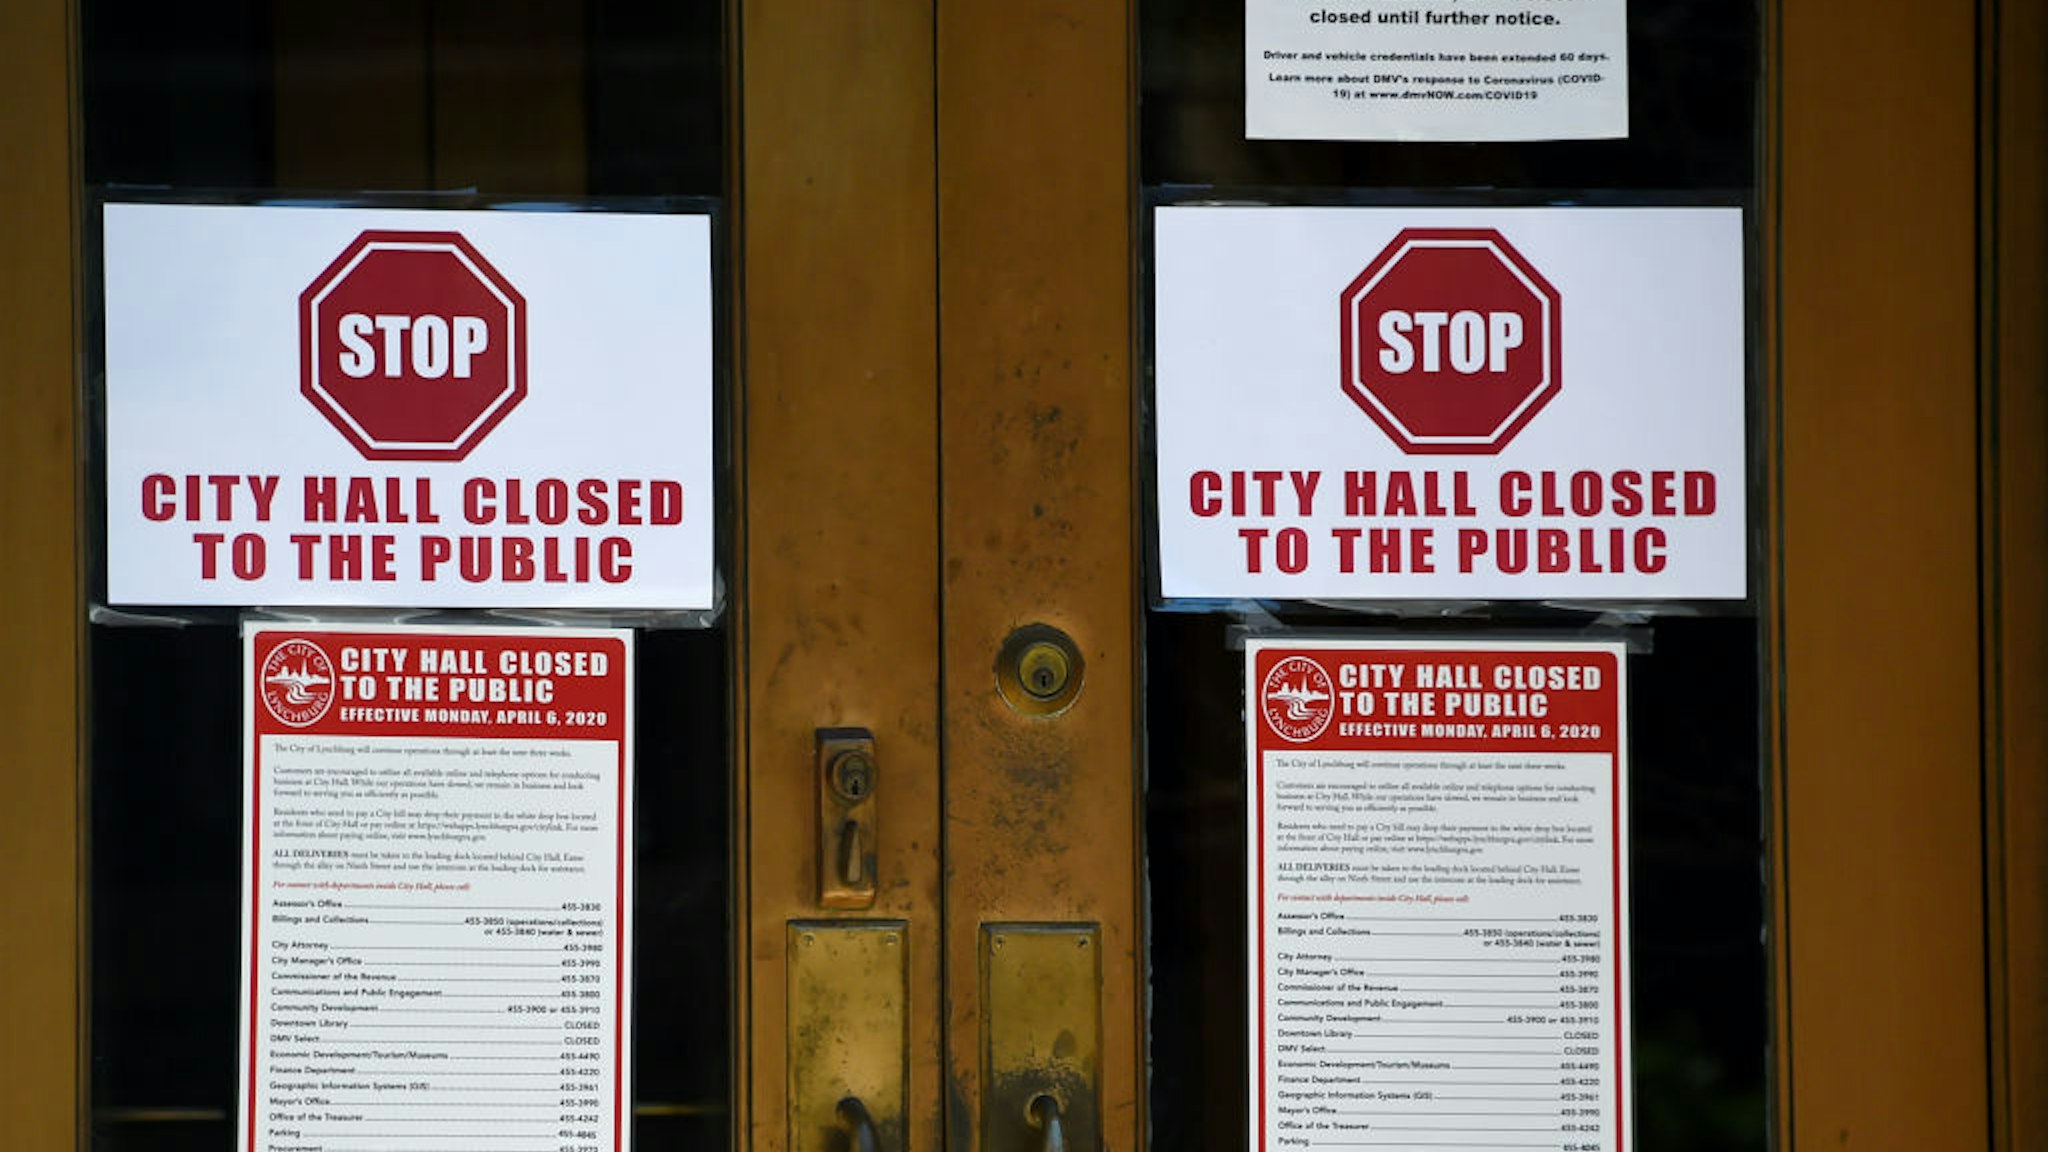 The Lynchburg, Virginia, City Hall is closed during the outbreak of COVID-19 coronavirus, on May 5, 2020.